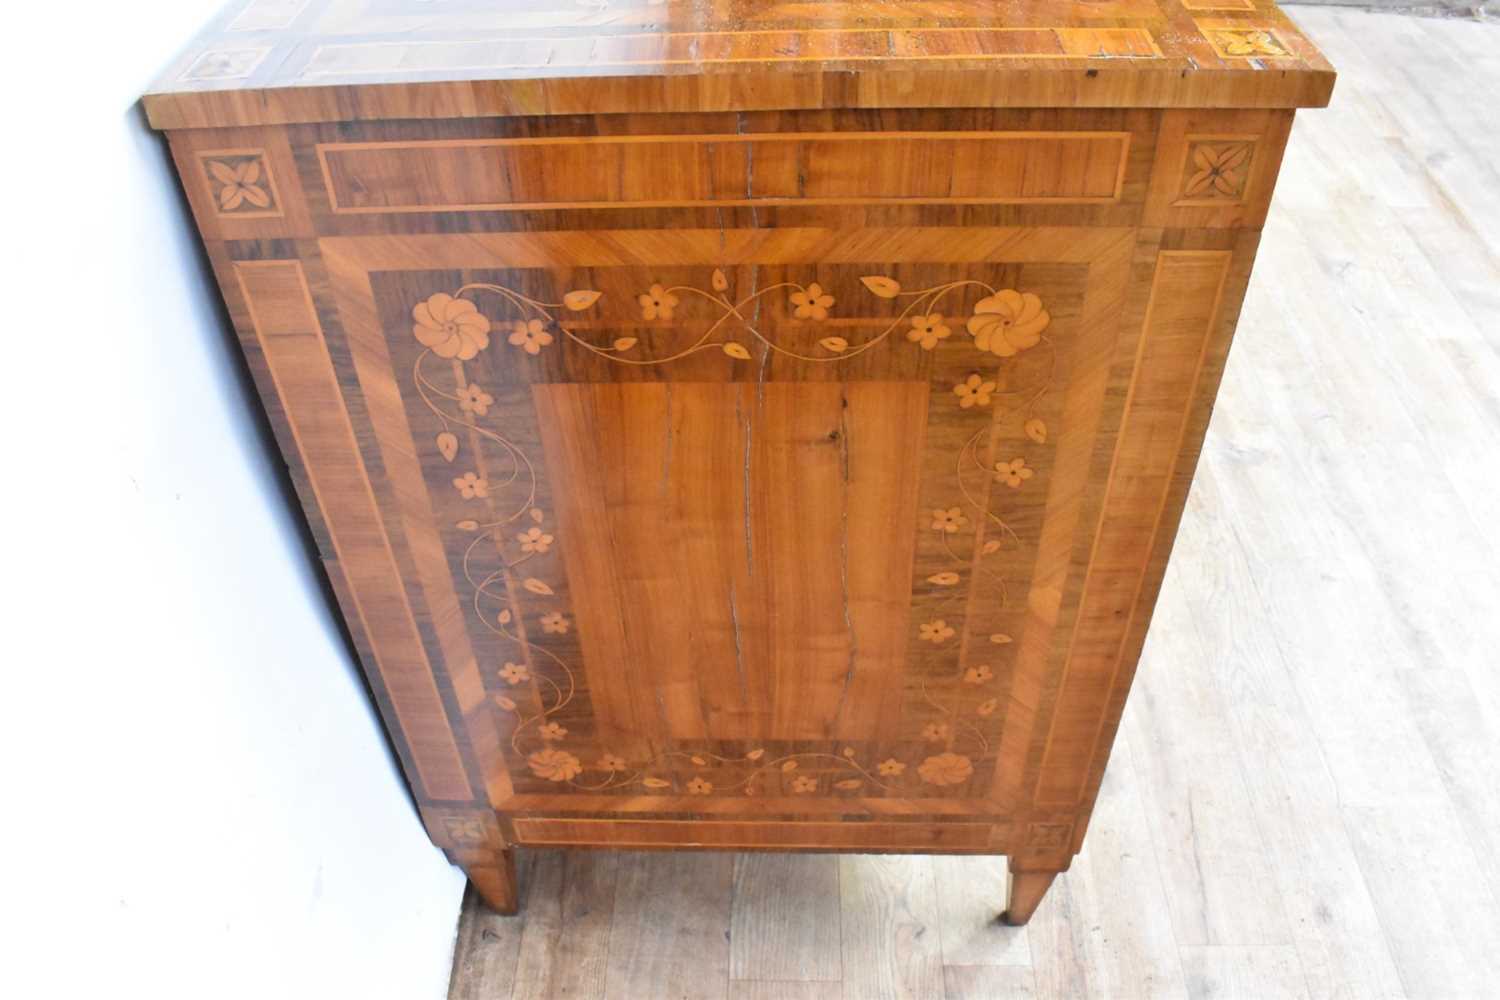 Late 18th century north Italian kingwood and marquetry inlaid commode - Image 8 of 21